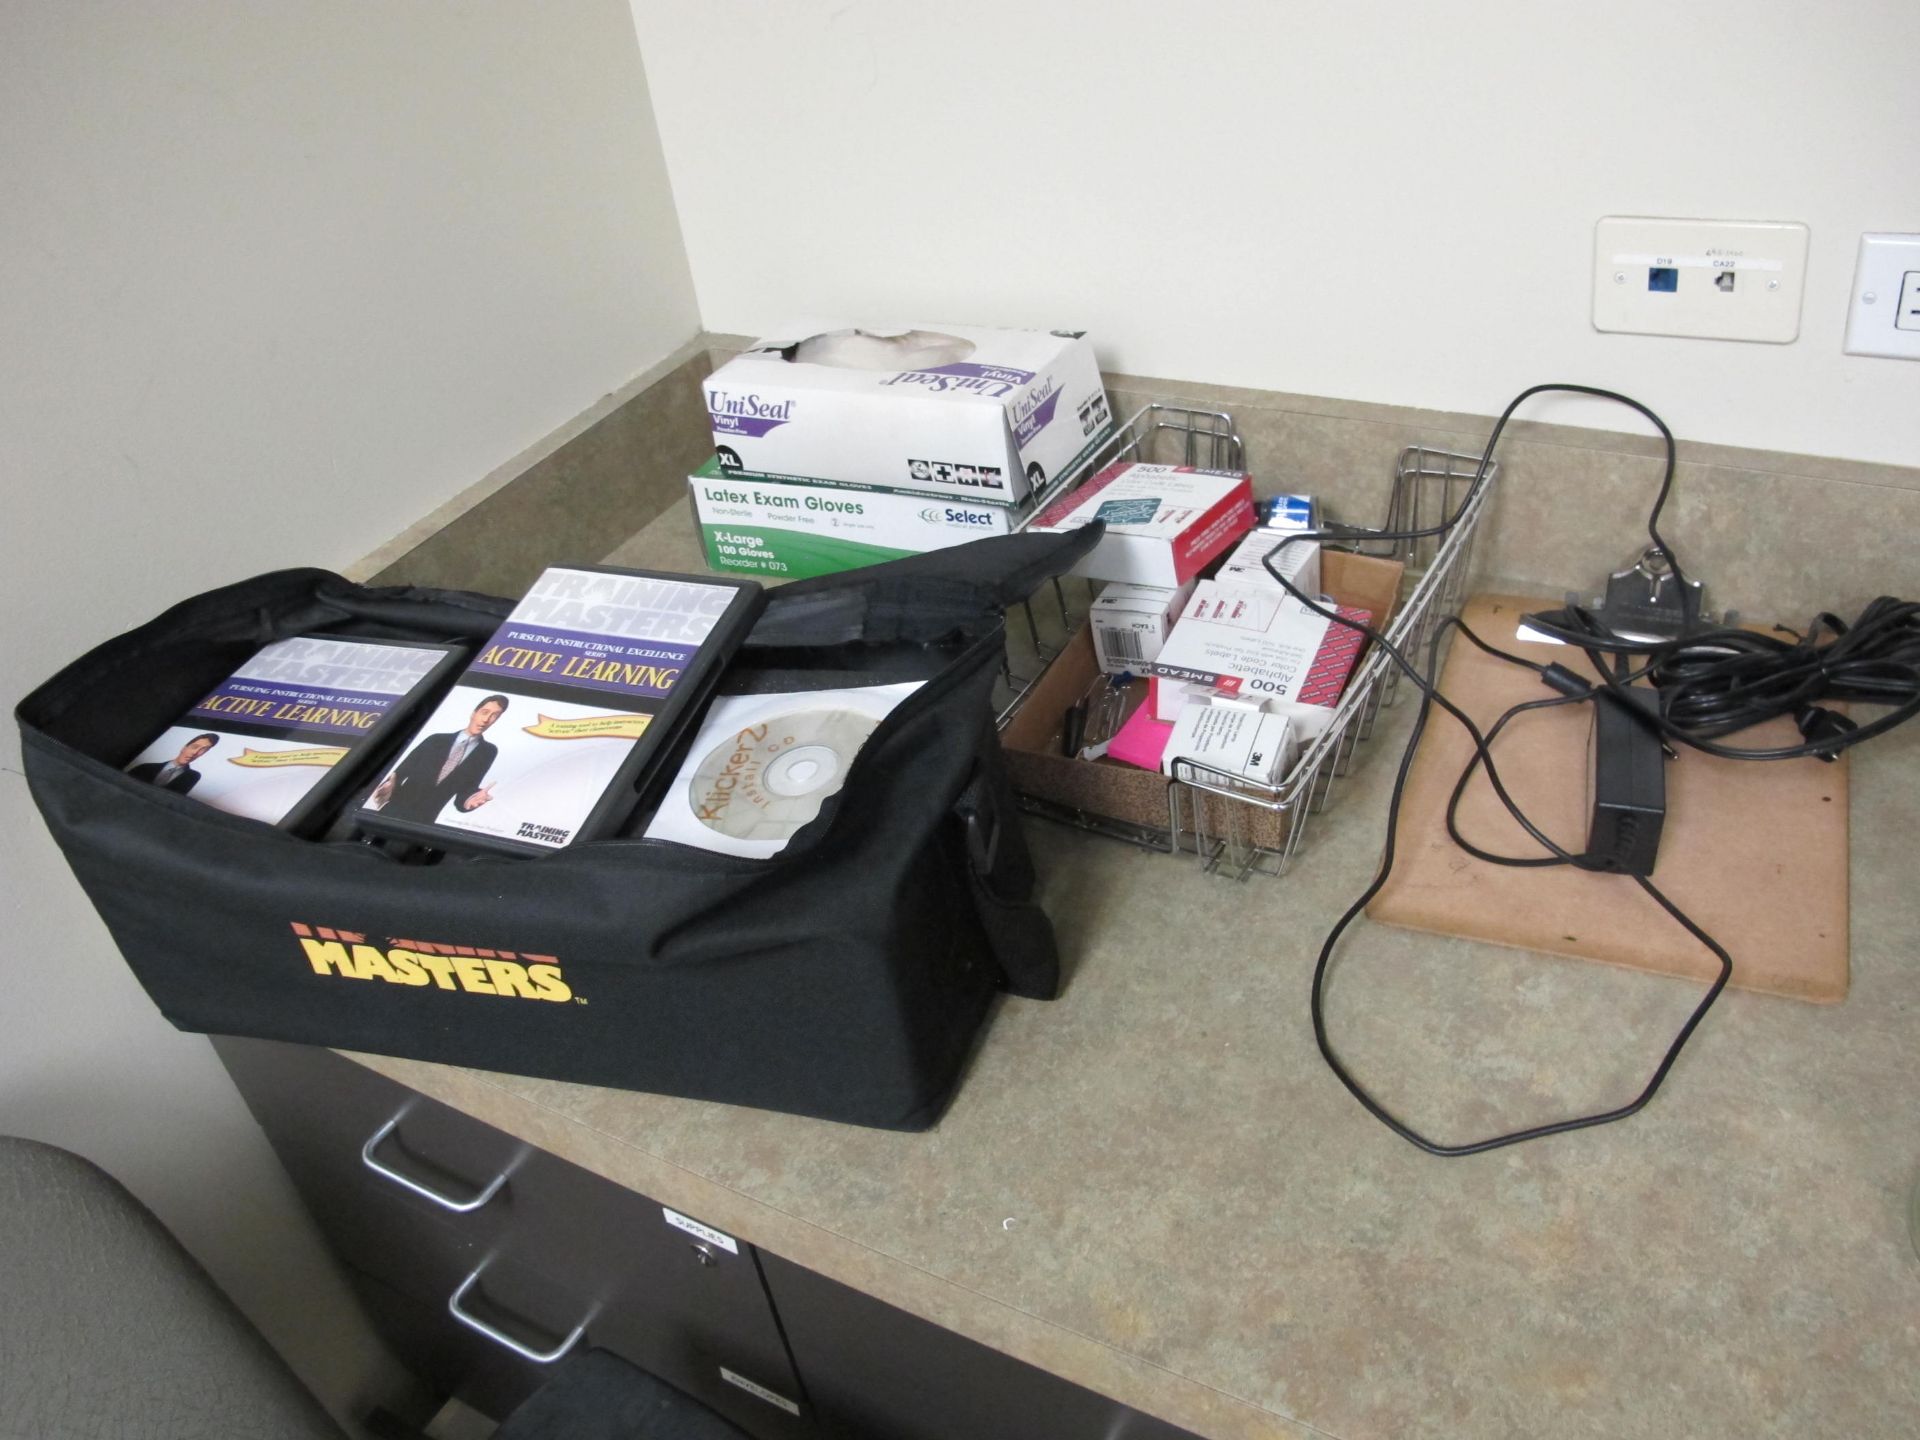 Contents of Room (including Mail Cubbies, Paper Organizers, Training Masters Active Learing - Image 3 of 5